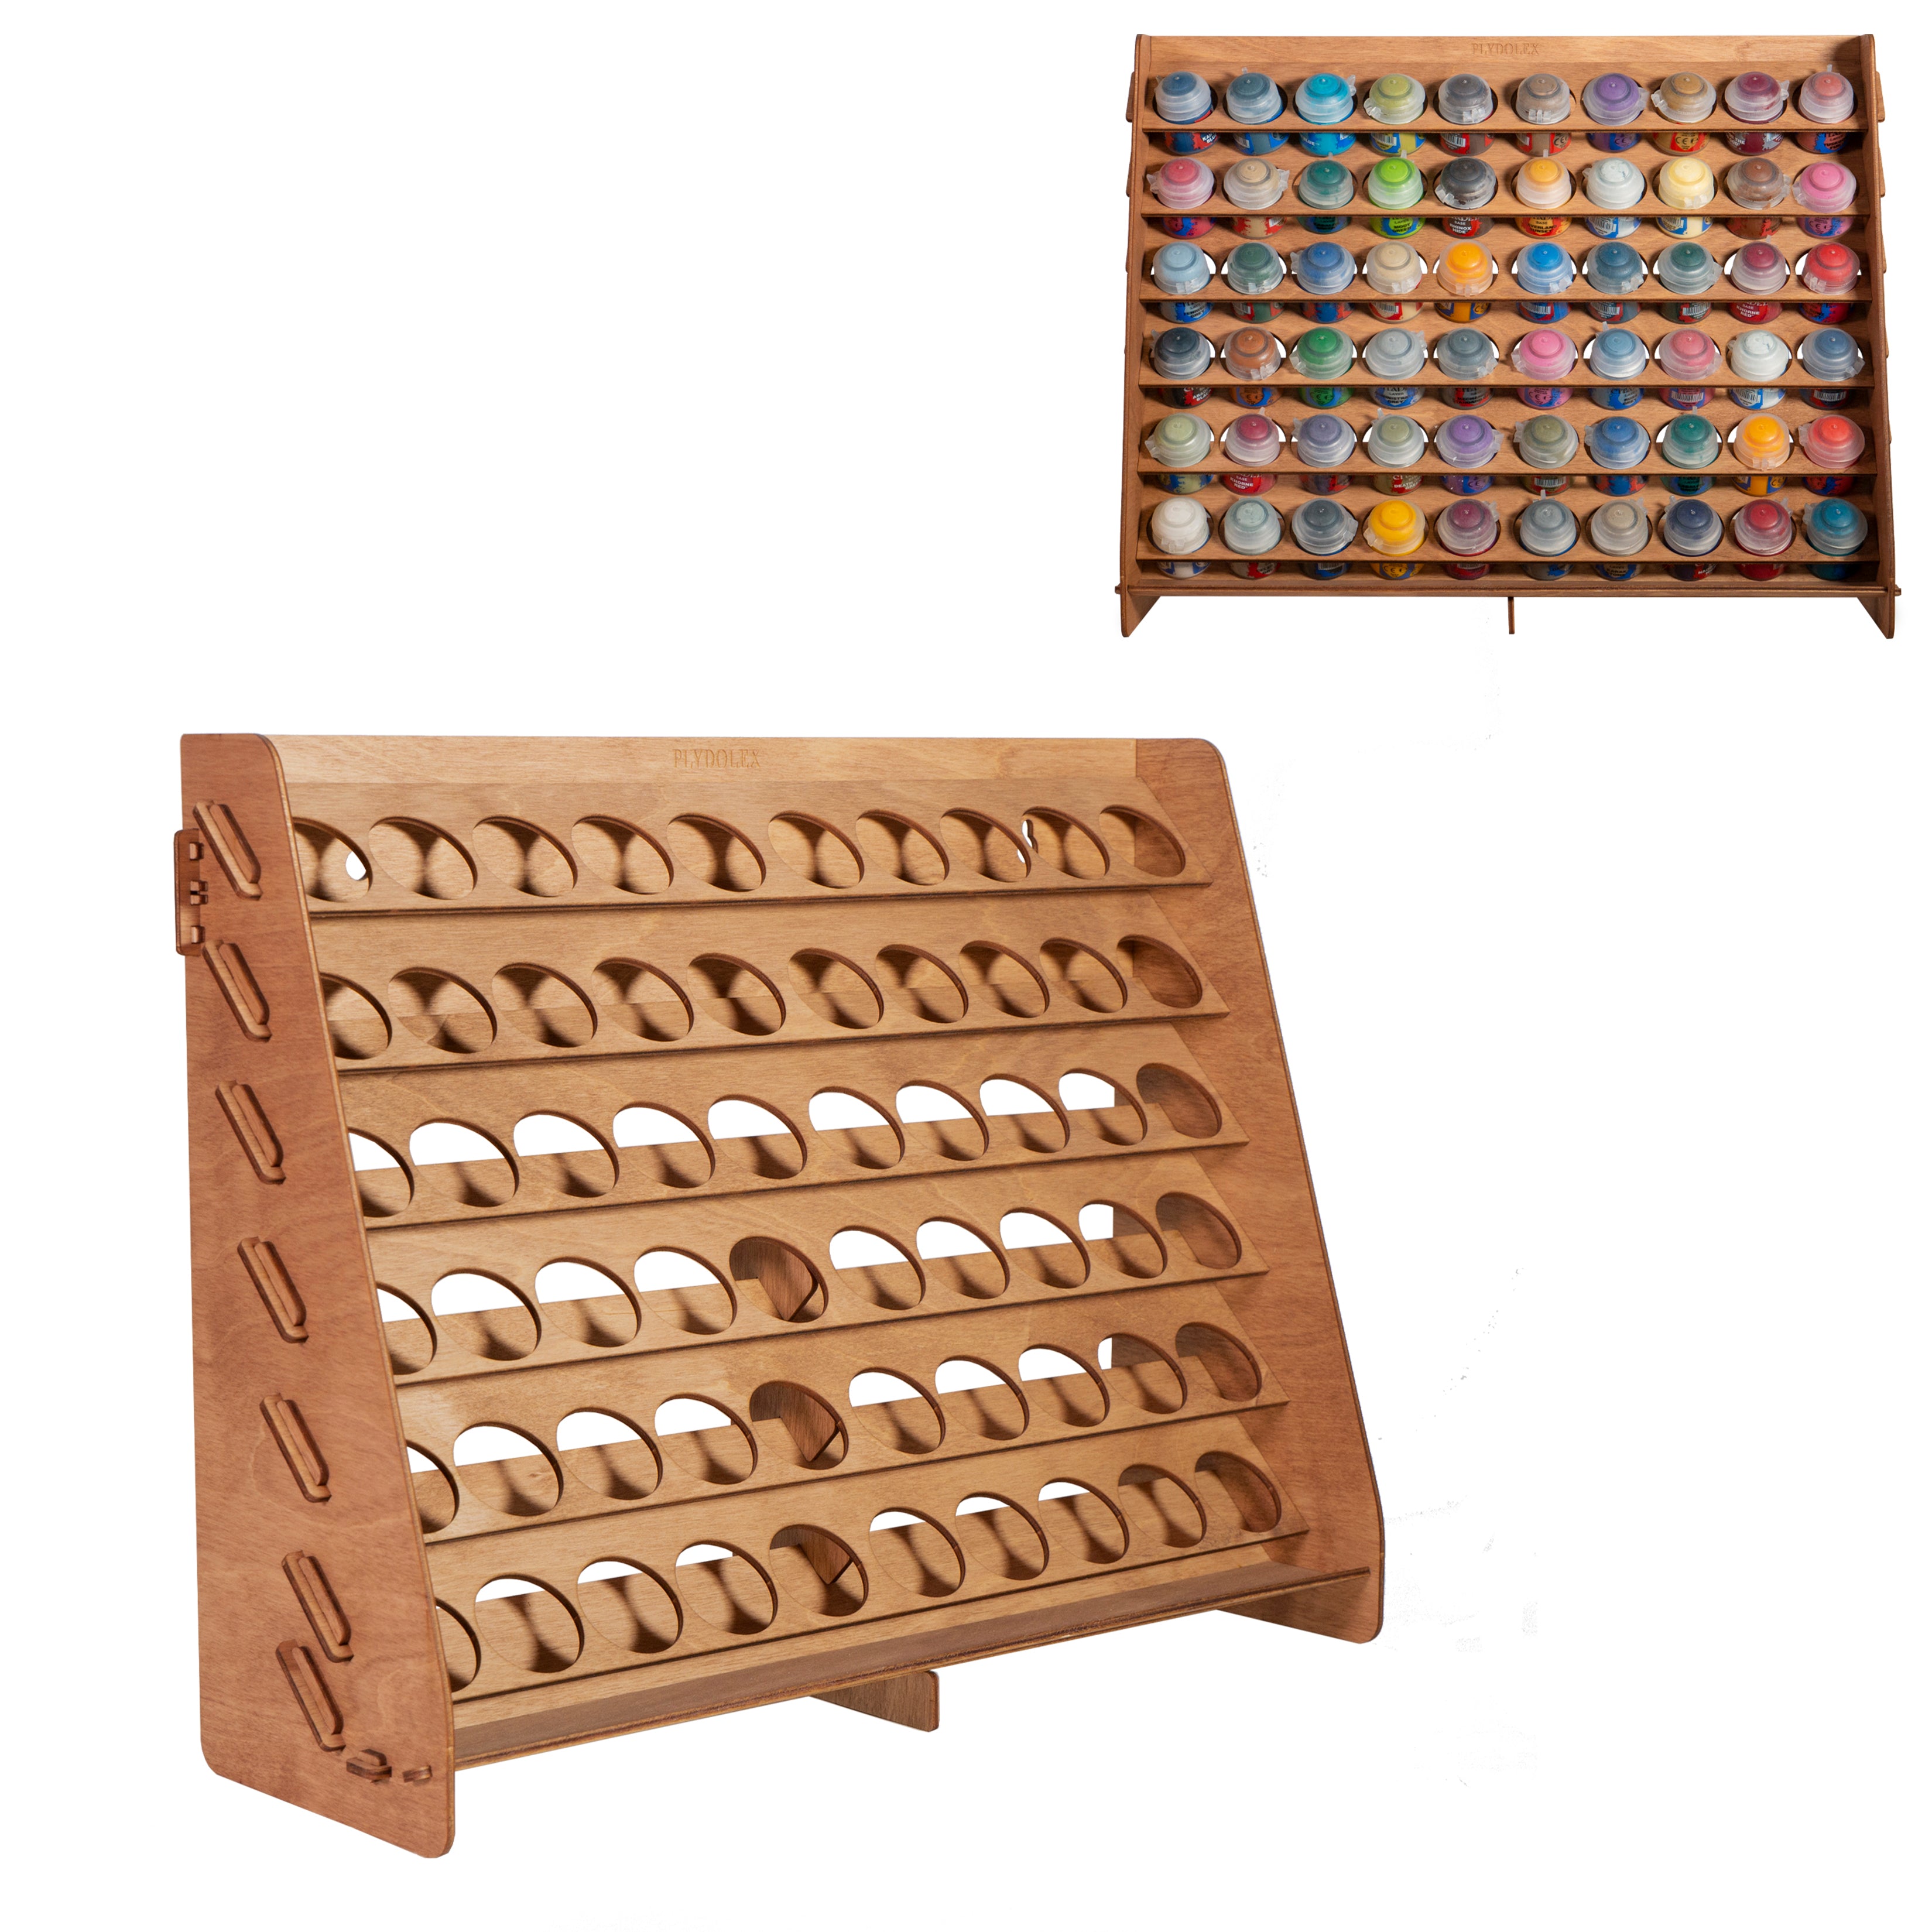 Plydolex Wooden Paint Organizer for 74 Bottles of Paints and 14 Paint Brushes - Paint Rack Organizer with 2 Cabinets for Art Tools and 6 Miniature